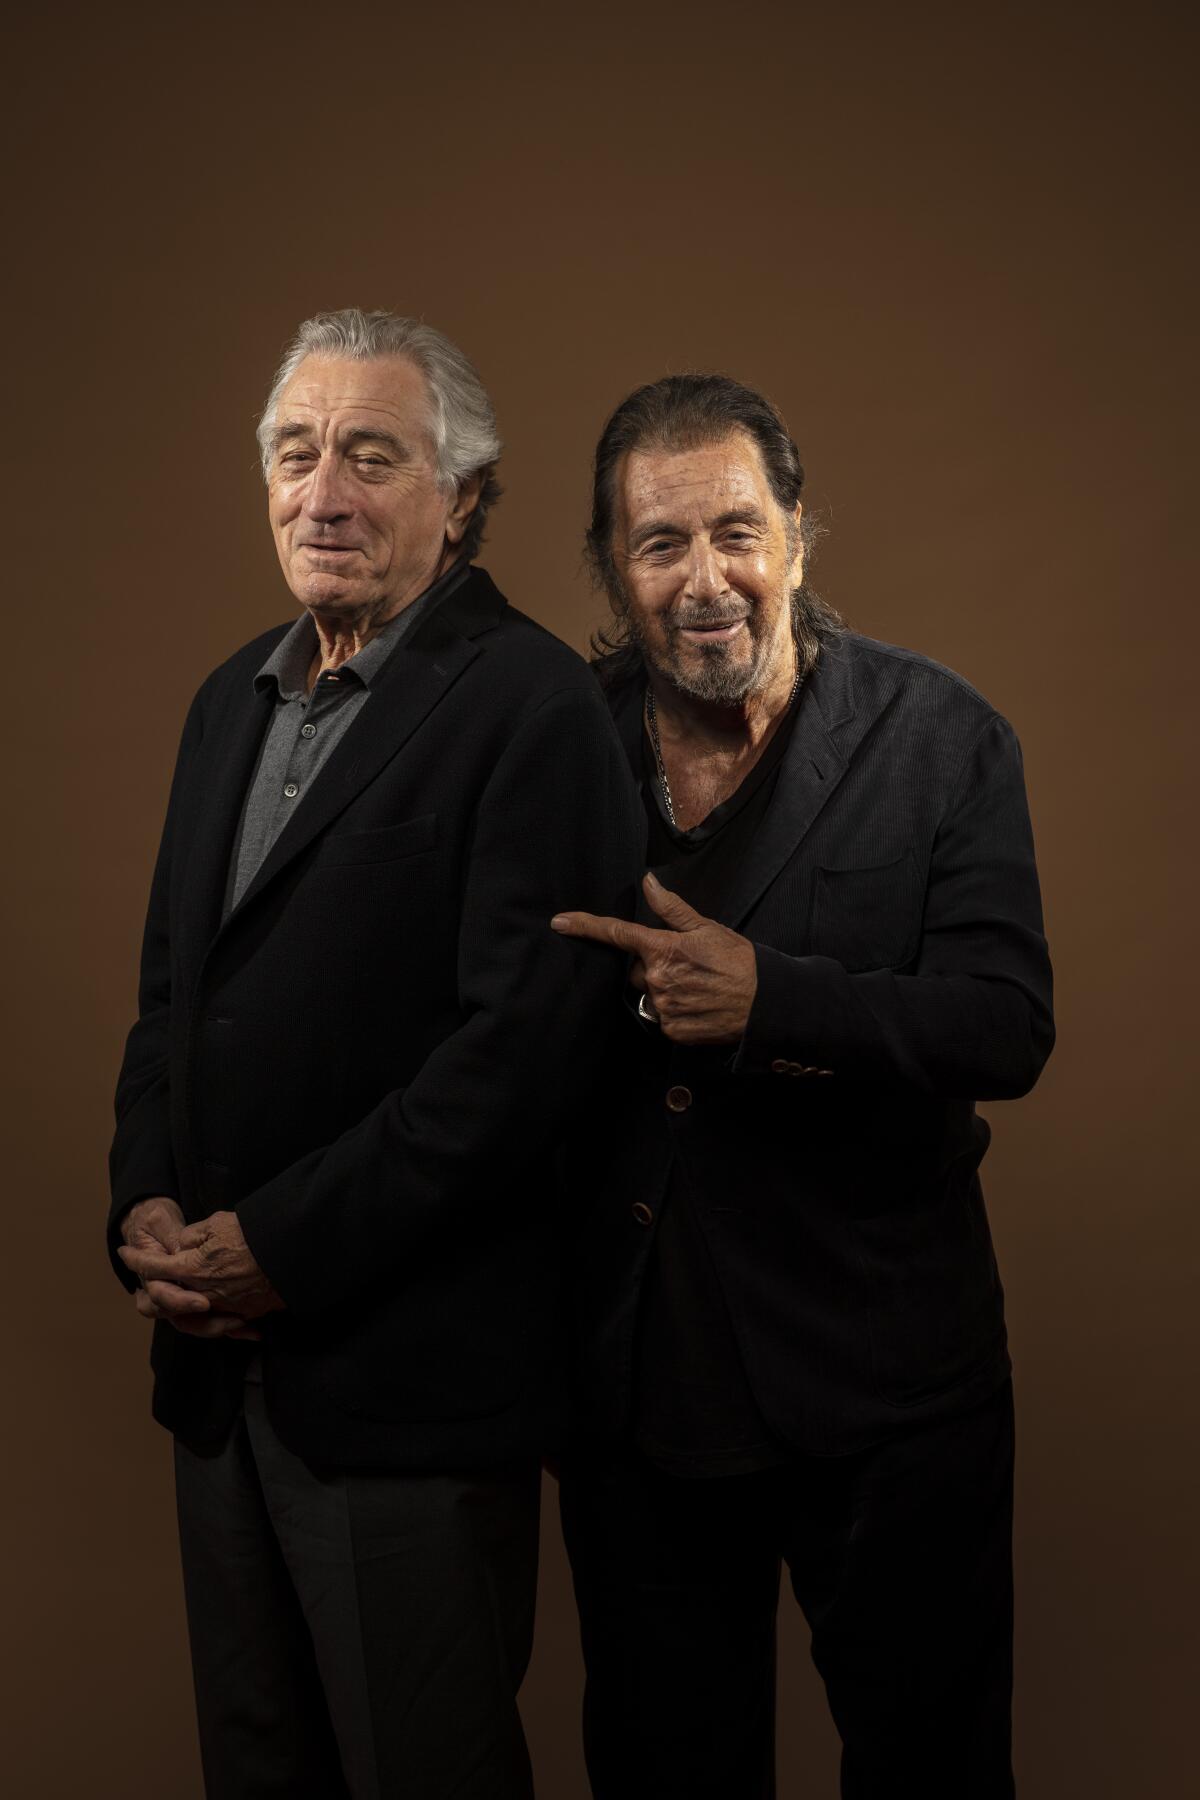 Robert De Niro wears a black blazer and stands next to Al Pacino who is dressed in black smiling, pointing to De Niro.